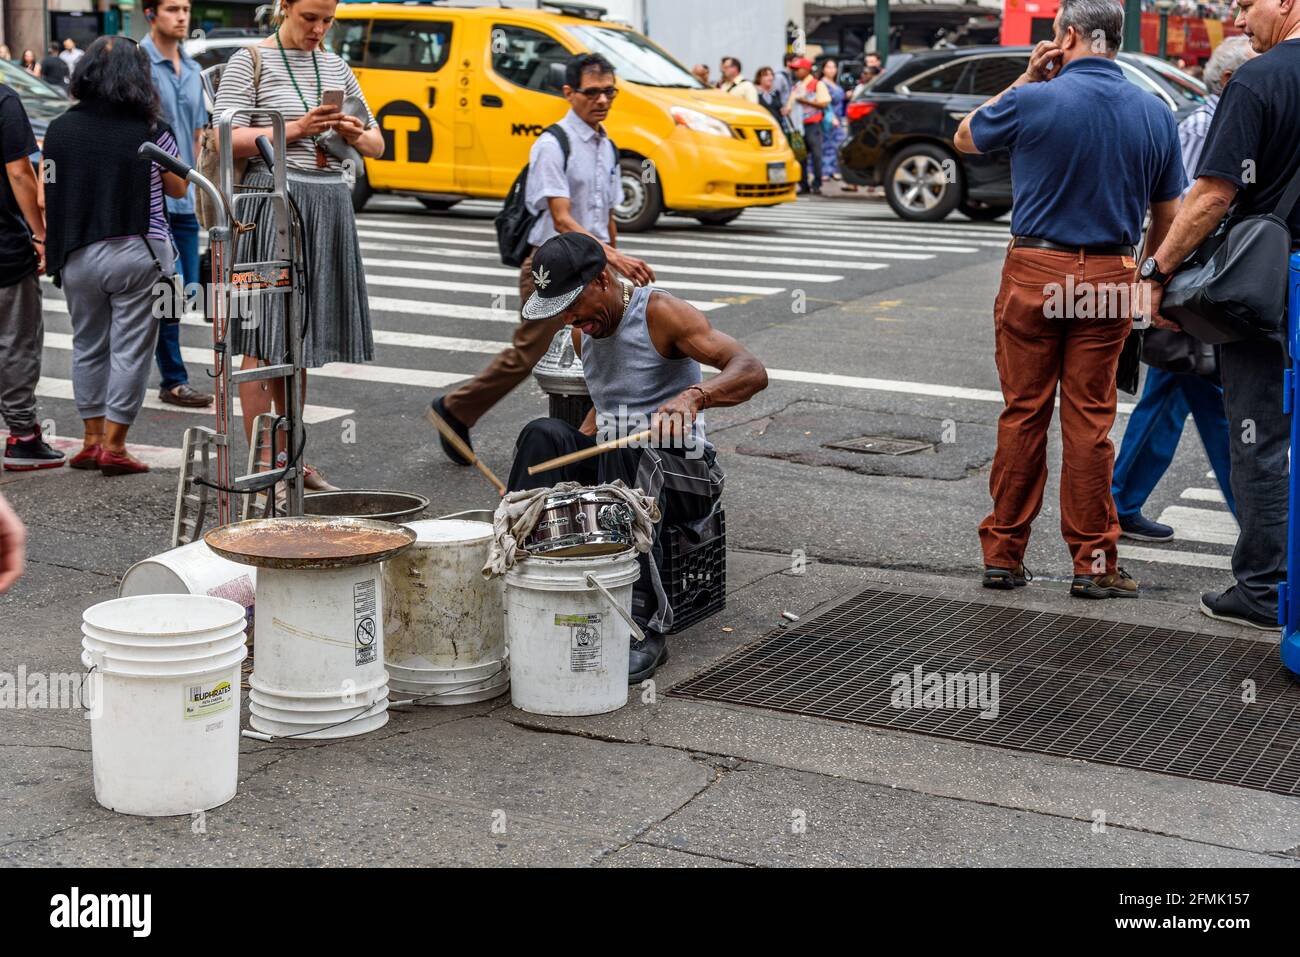 New York City, USA - June 22, 2018: Black man playing drums with plastic buckets in New York city street Stock Photo